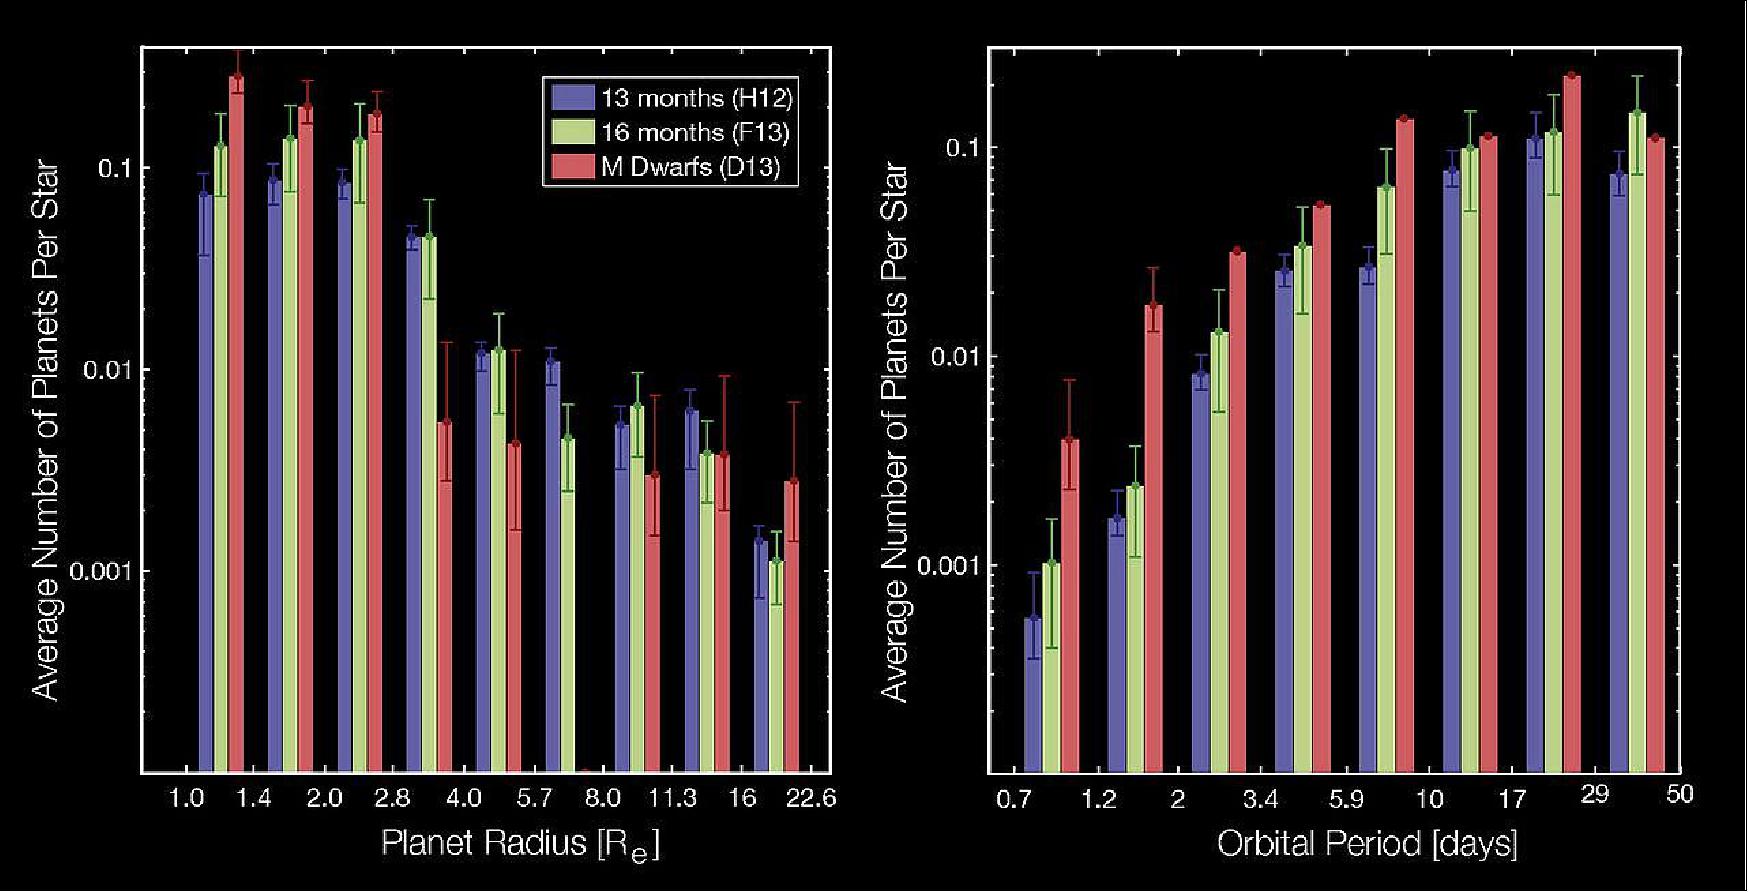 Figure 58: The radius distribution (Left) and period distribution (Right) of planet occurrence rates expressed as the average number of planets per star. The distributions have been marginalized over periods between 0.68 and 50 d (radius distribution) and radii between 0.5 and 22.6 R⊗ (period distribution). H12 refers to ref. 88, F13 refers to ref. 47, and D13 refers to ref. 92. The reported one-sigma uncertainties are shown ((image credit: NASA/ARC, Natalie M. Batalha, Ref. 92)